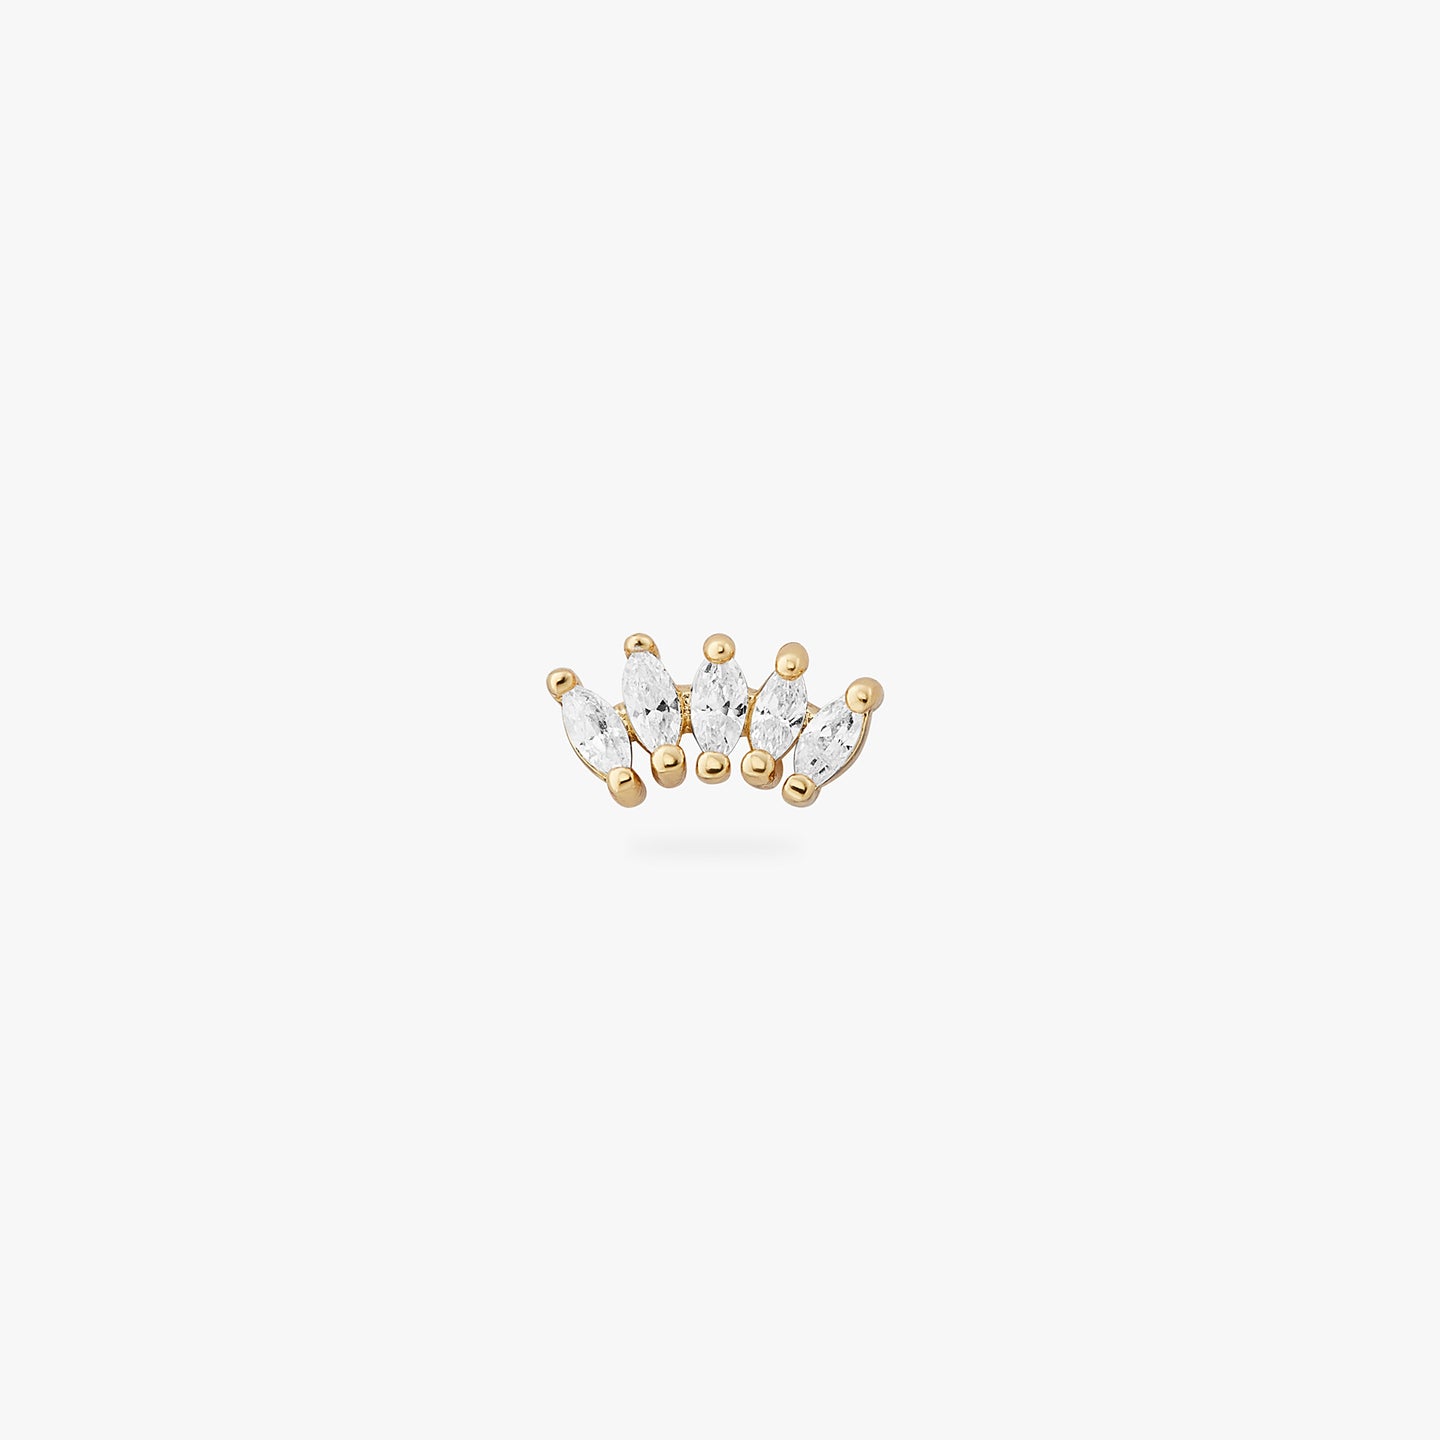 a gold flatback stud with a small crown-shape of clear marquise studs color:null|gold/clear|6mm / gold/clear|8mm / gold/clear|10mm / gold/clear|6mm / gold|8mm / gold|10mm / gold